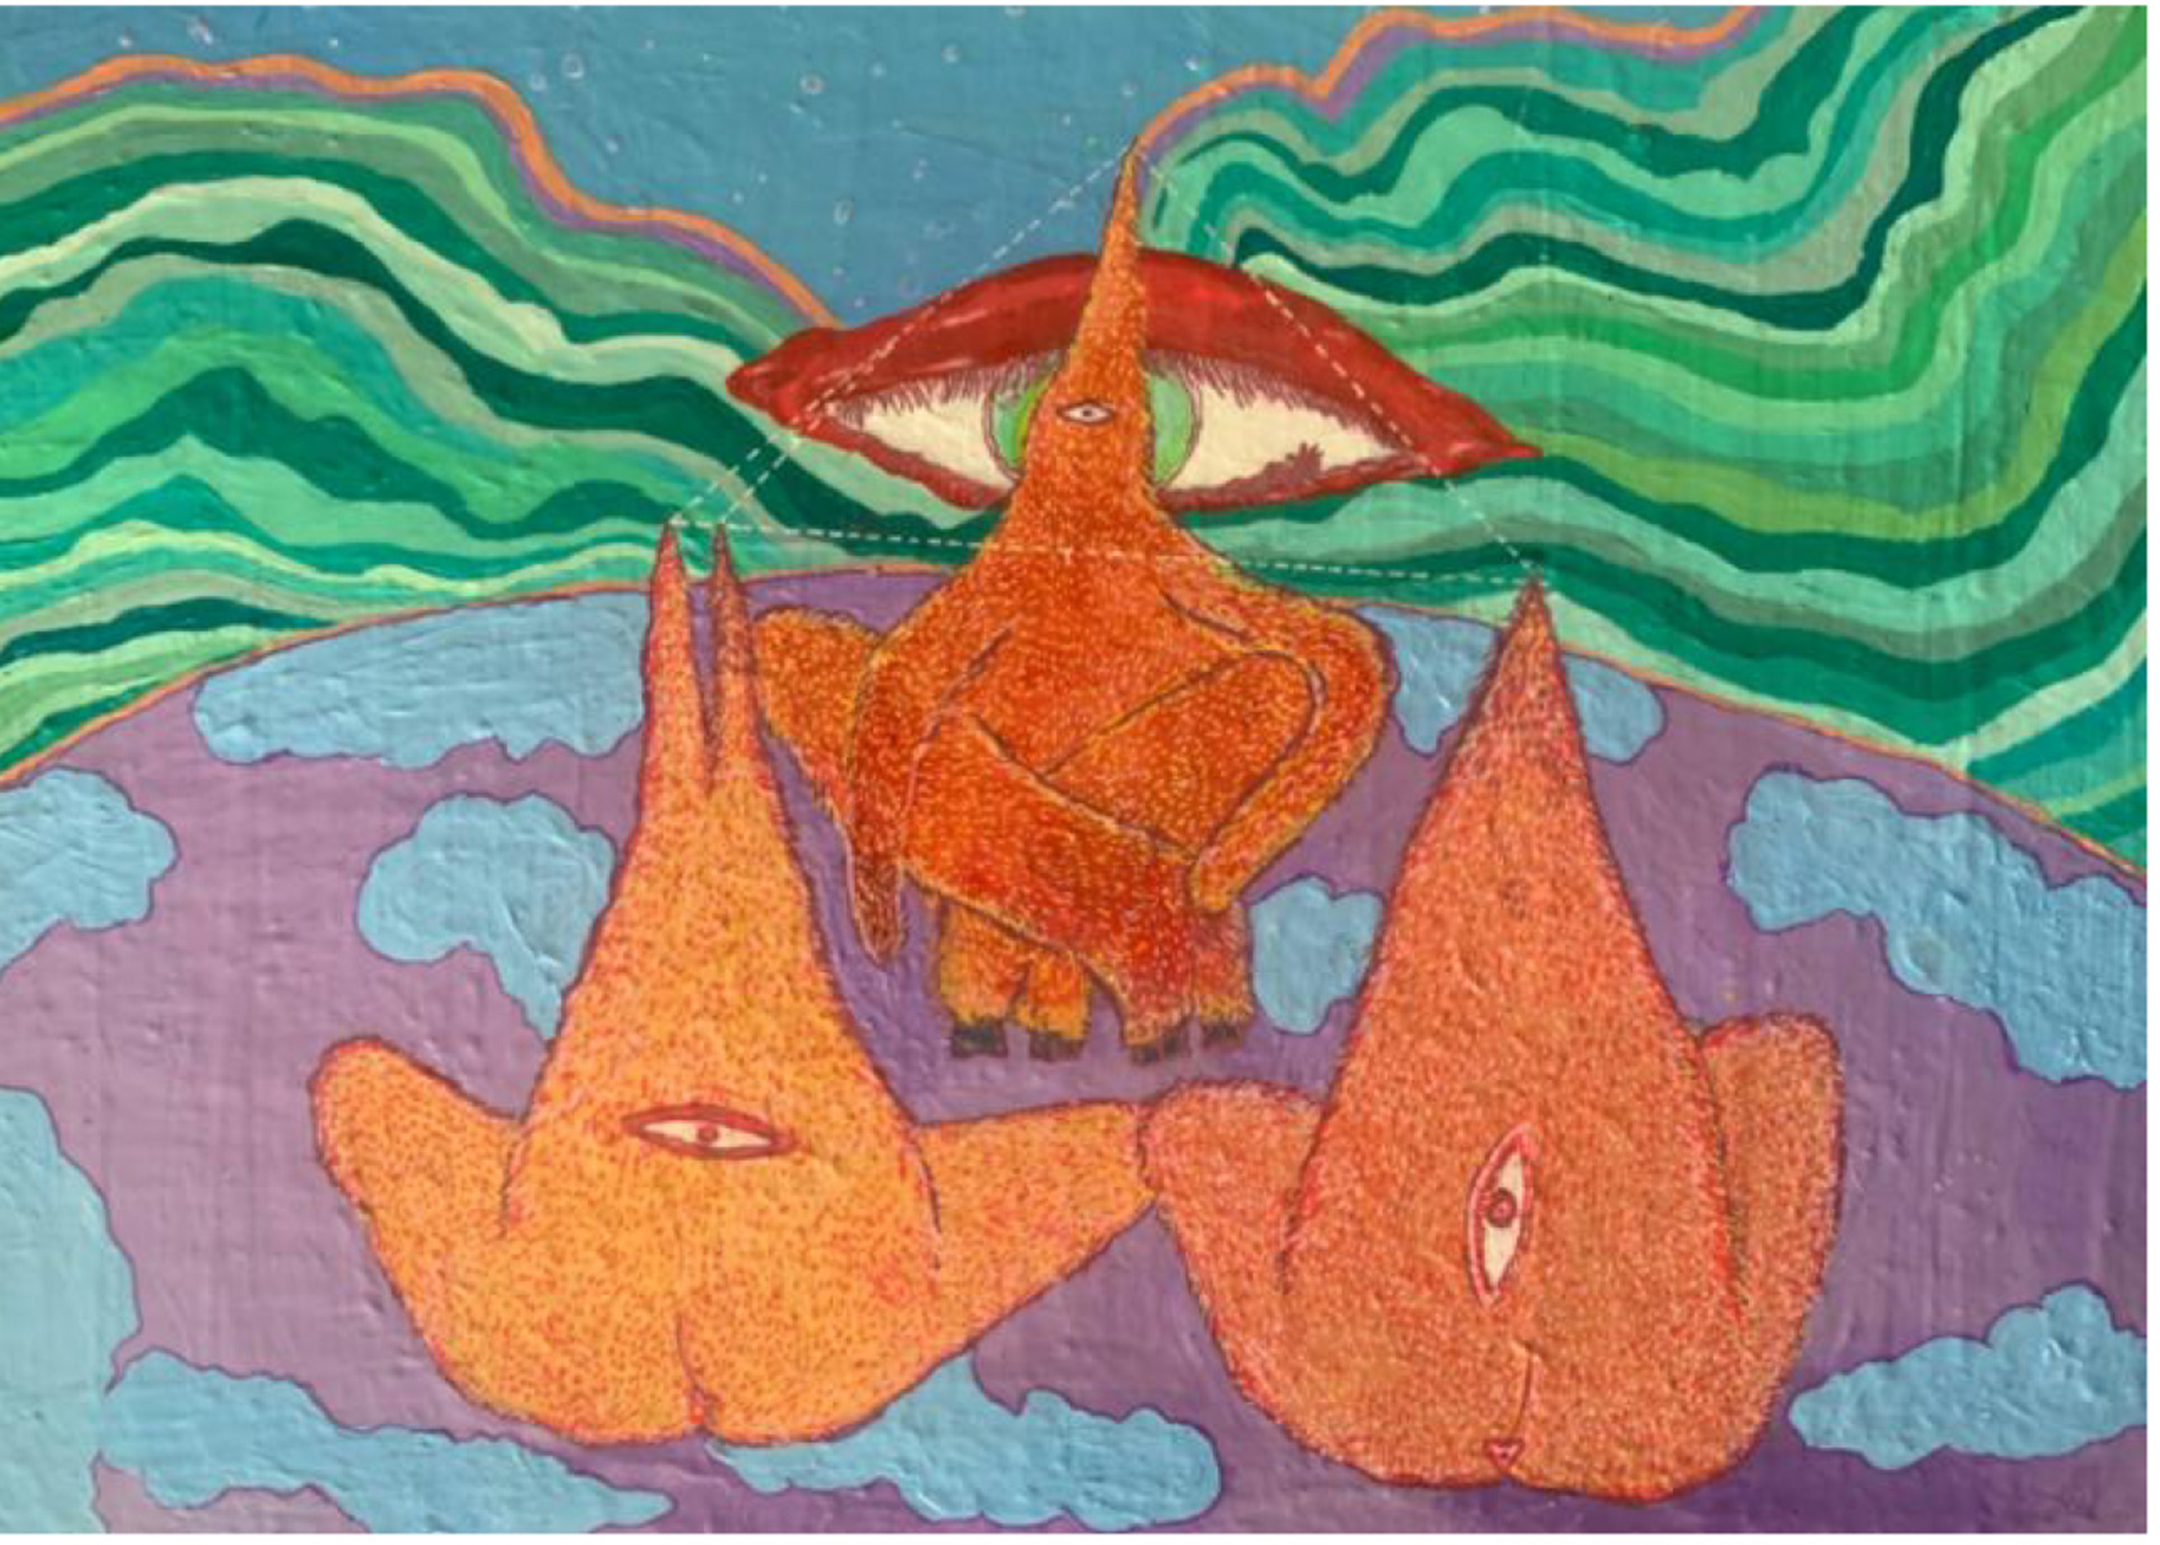 Painting of angular aliens in orange sitting on a blue and purple sphere with a green sky with a floating eye in the background